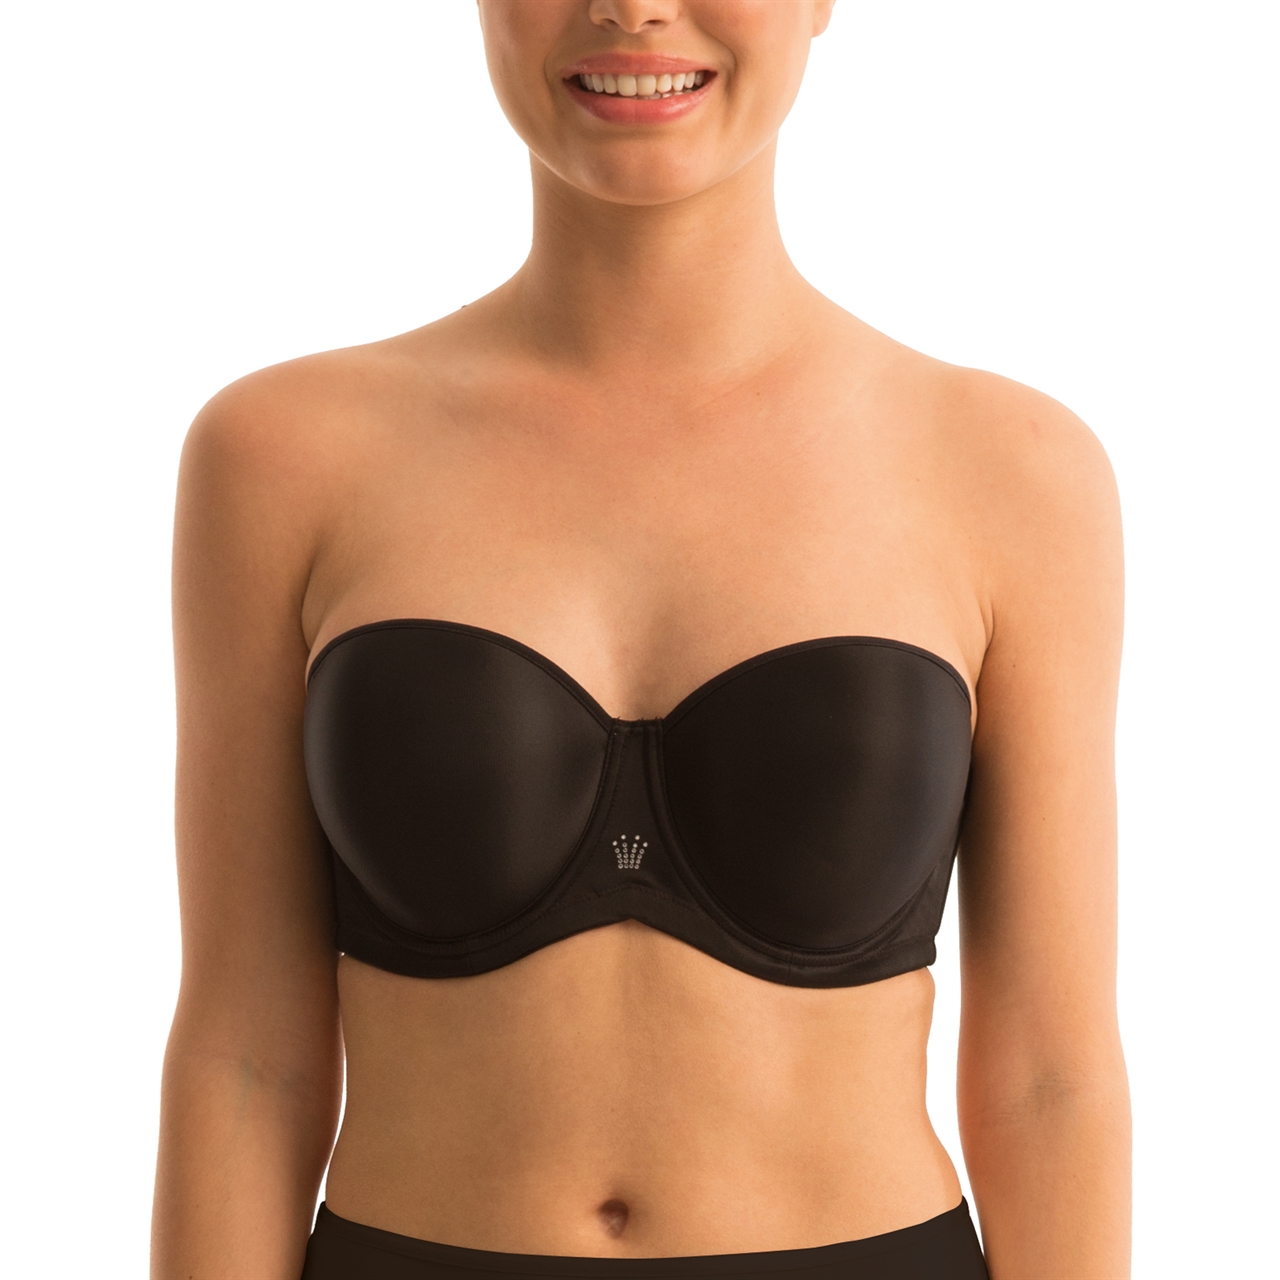 https://www.boobytrapwarehouse.com.au/content/images/thumbs/0001963_25-off-rrp-triumph-beautiful-silhouette-strapless-underwire-bra-10107623.jpeg